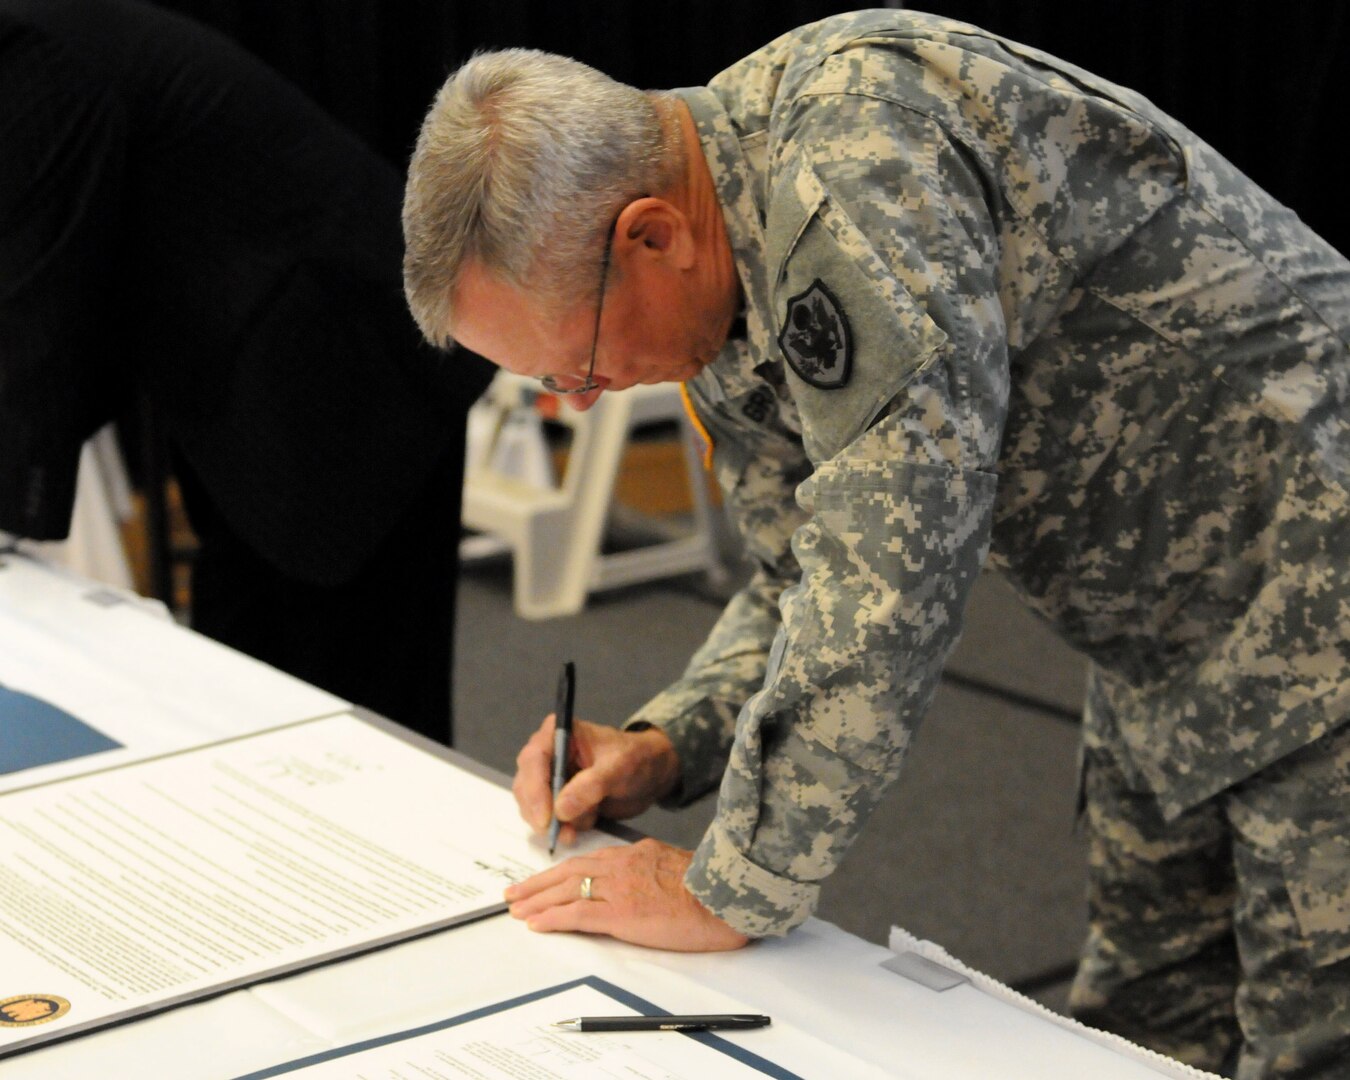 Army Gen. Frank Grass, chief of the National Guard Bureau, signs a Memorandum of Understanding, which is designed to assist National Guard Families, Camp Dawson, W. Va., Oct. 29, 2014. Grass, along with Sonny Ramaswamy, director, National Institute of Food and Agriculture, signed the Memorandum of Understanding that will better enhance the health and well-being of military families. 
